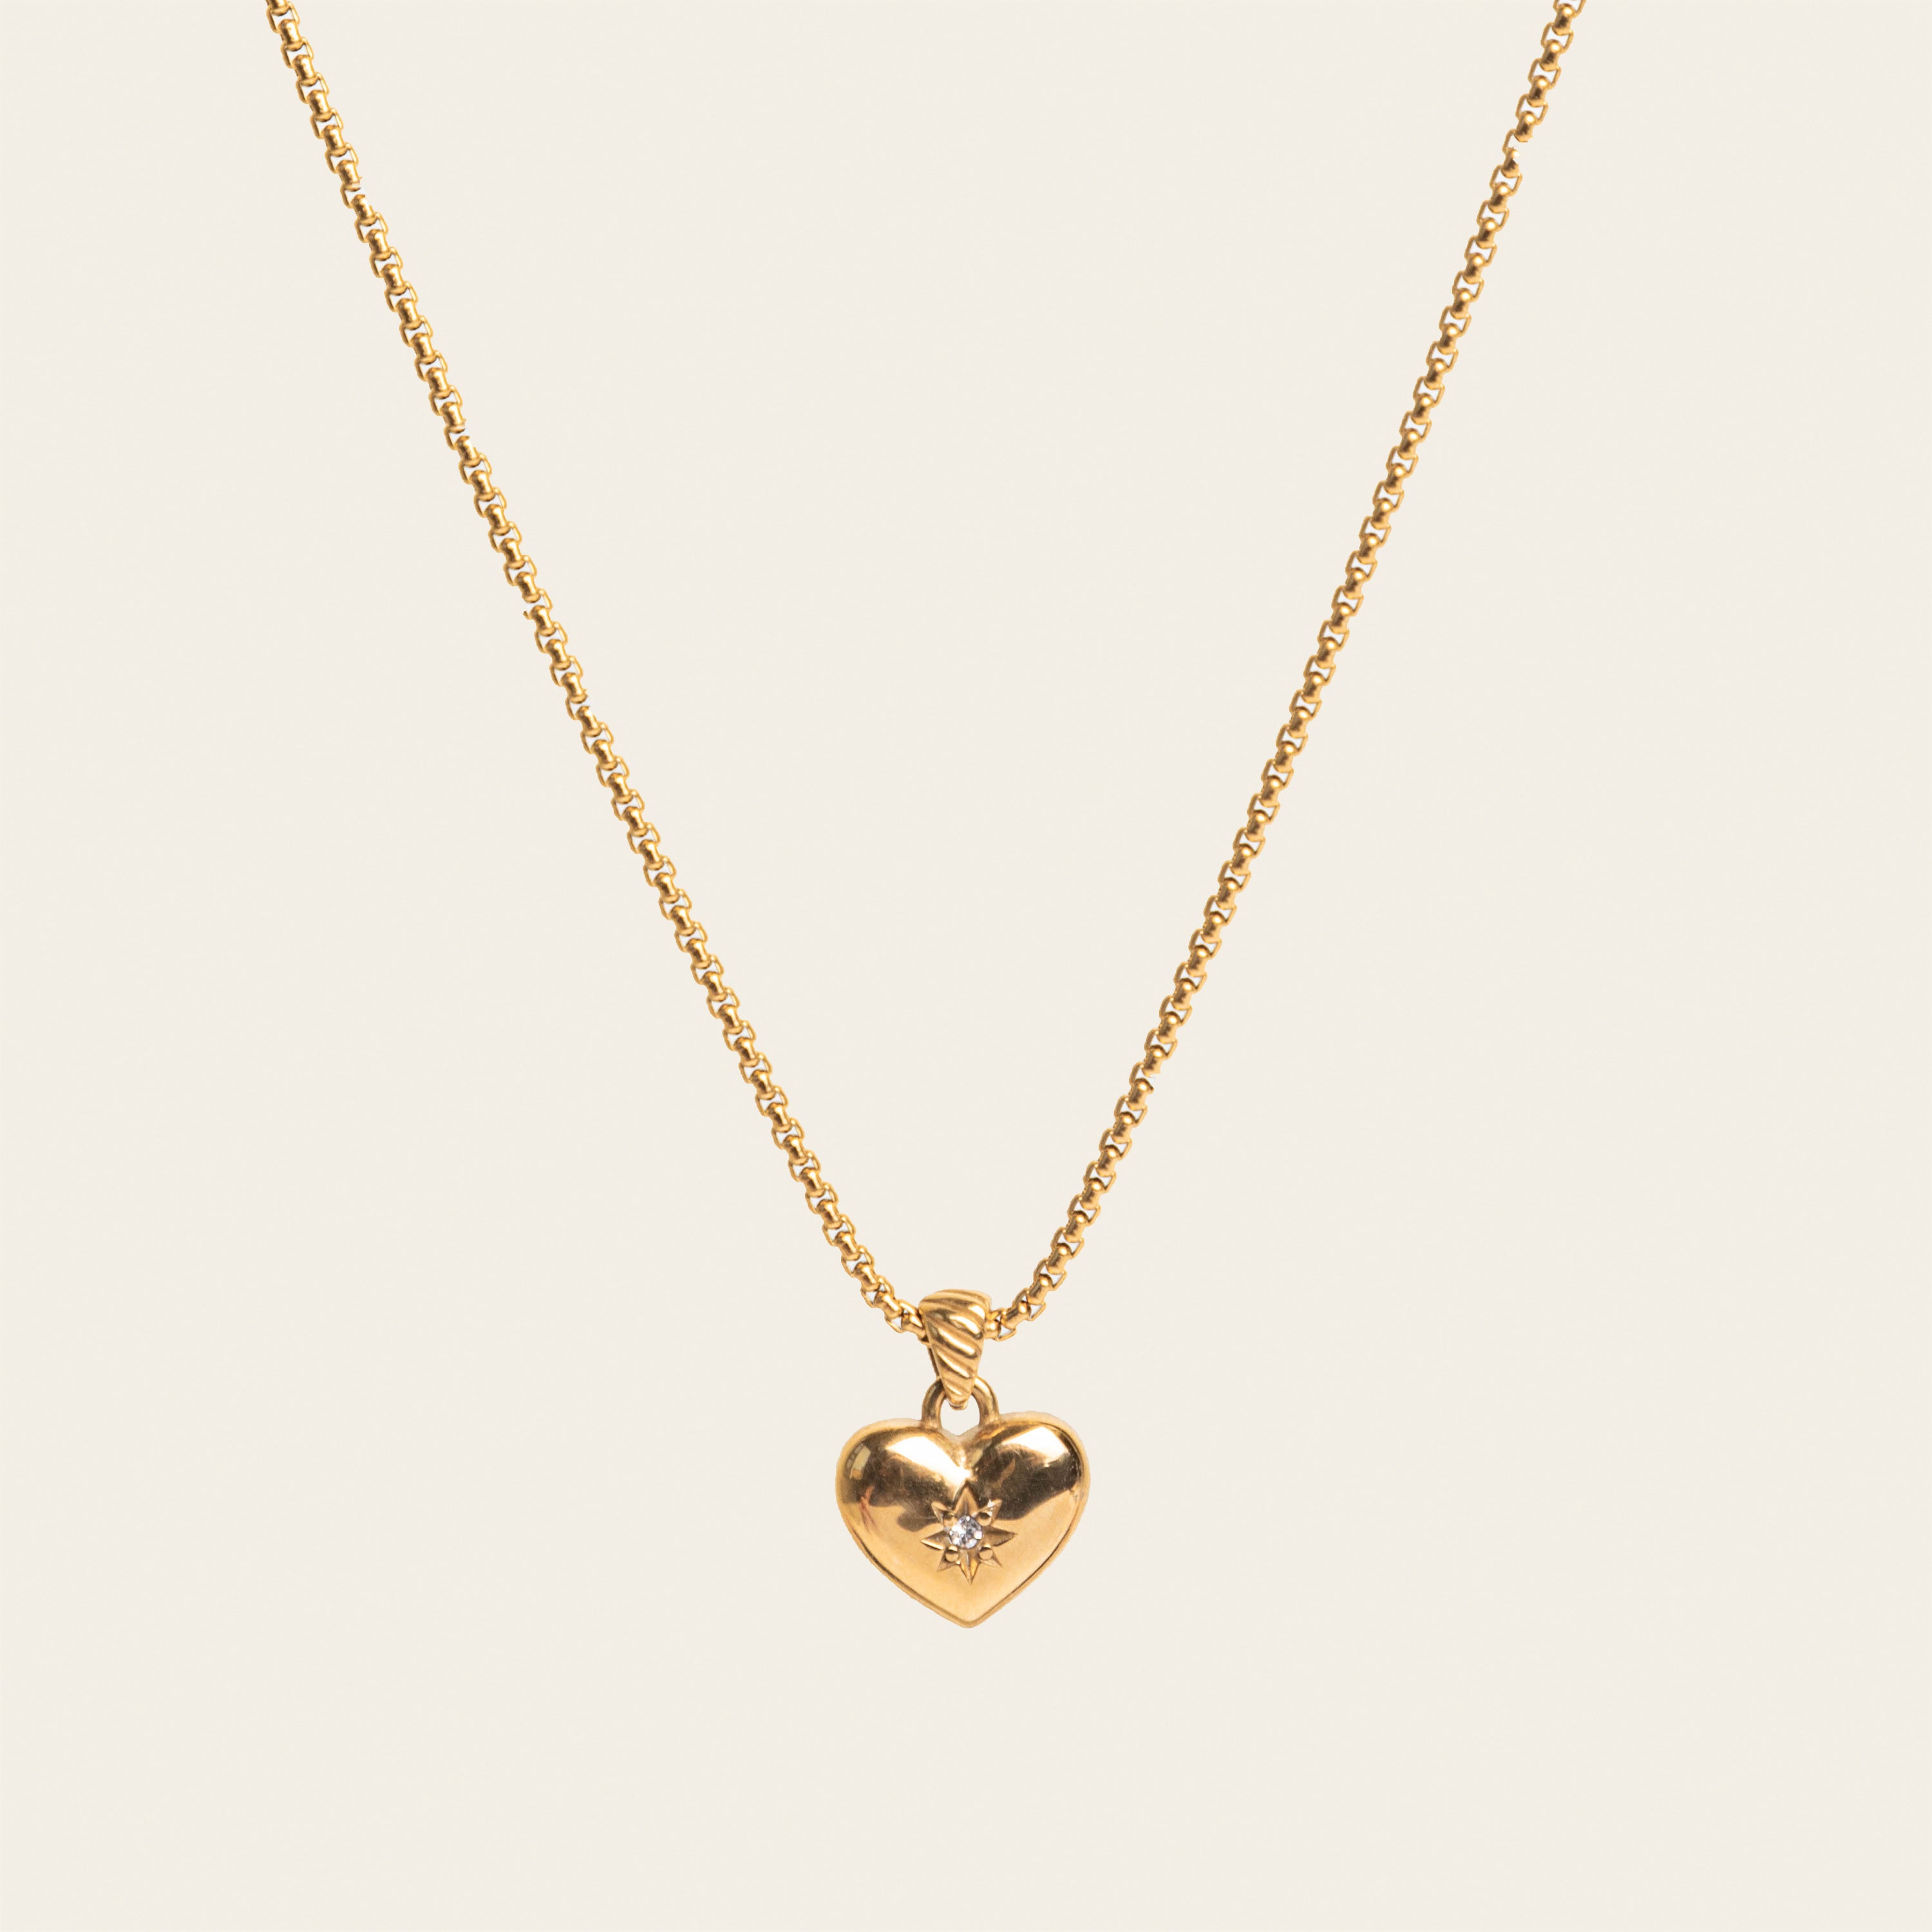 Image of the Jude Heart Necklace is expertly crafted from 18K Gold Plated Stainless Steel, resulting in a durable and water-resistant accessory. Its adjustable chain allows for a customized fit. Elegant and functional, this single necklace is a must-have for any jewelry collection.